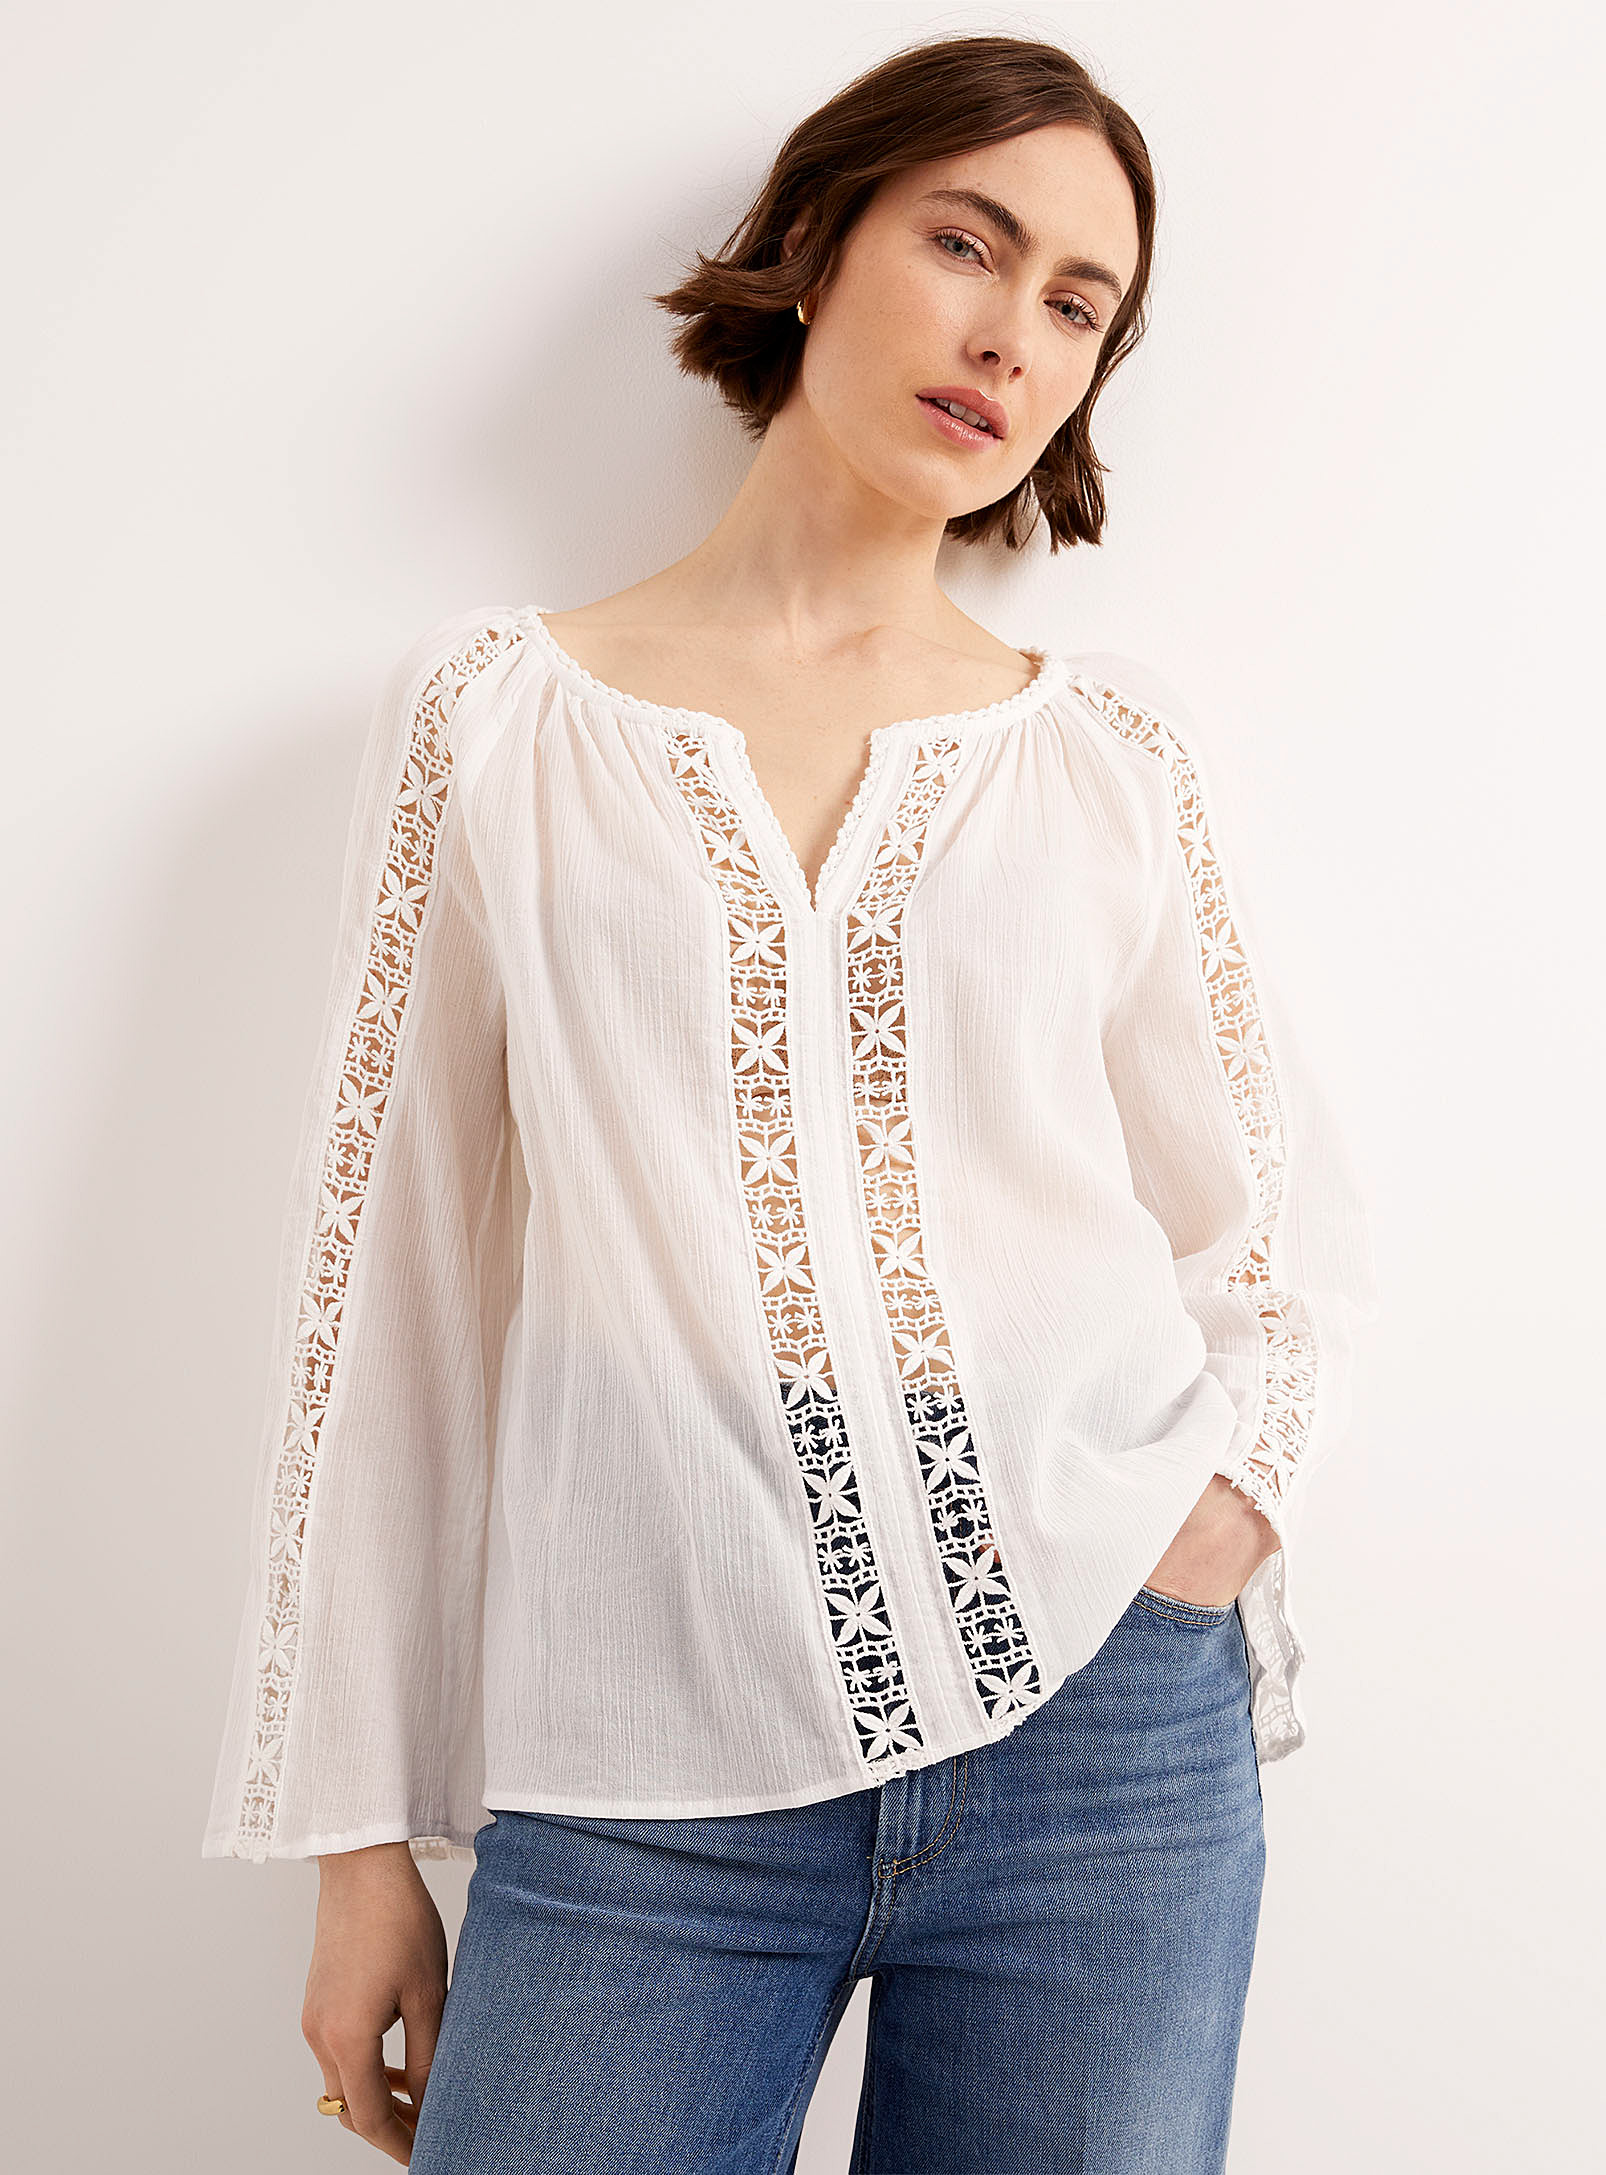 Contemporaine Crocheted Ribbons Sheer Blouse In White